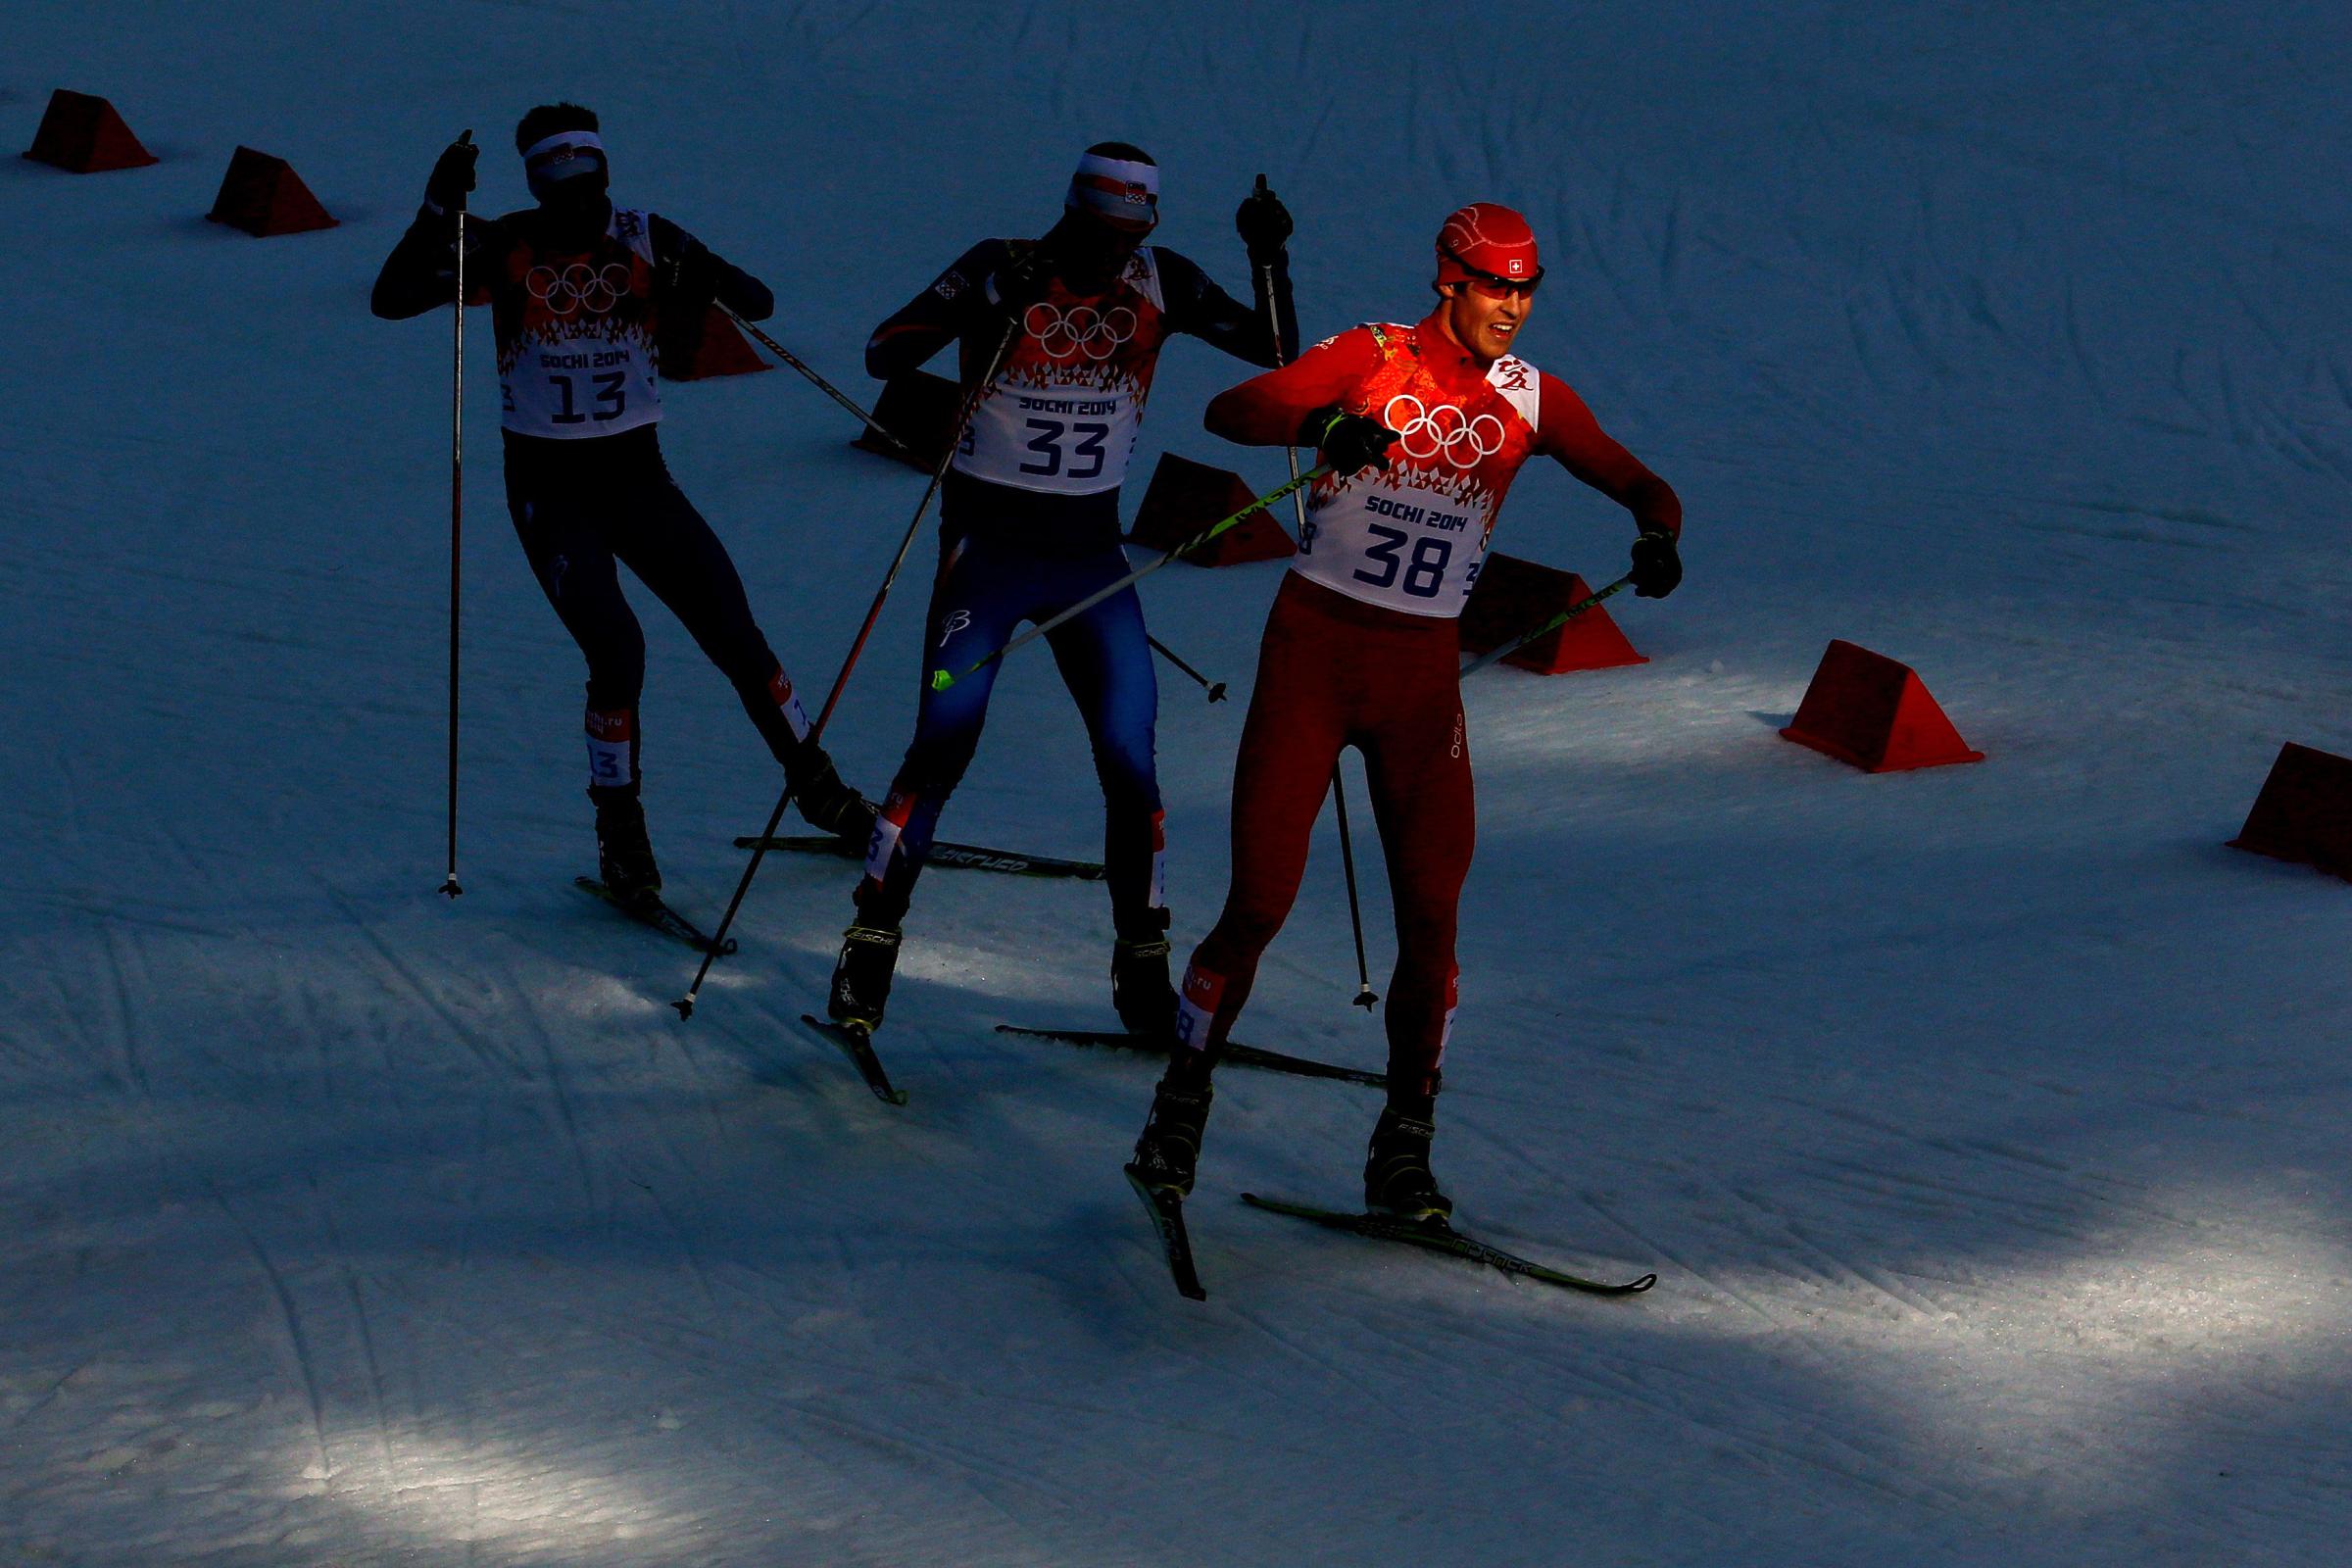 Tomas Portyk of the Czech Republic, Tomas Slavik of Czech Republic and Tim Hug of Switzerland in action during the Nordic Combined Individual Gundersen Normal Hill and 10km Cross Country.